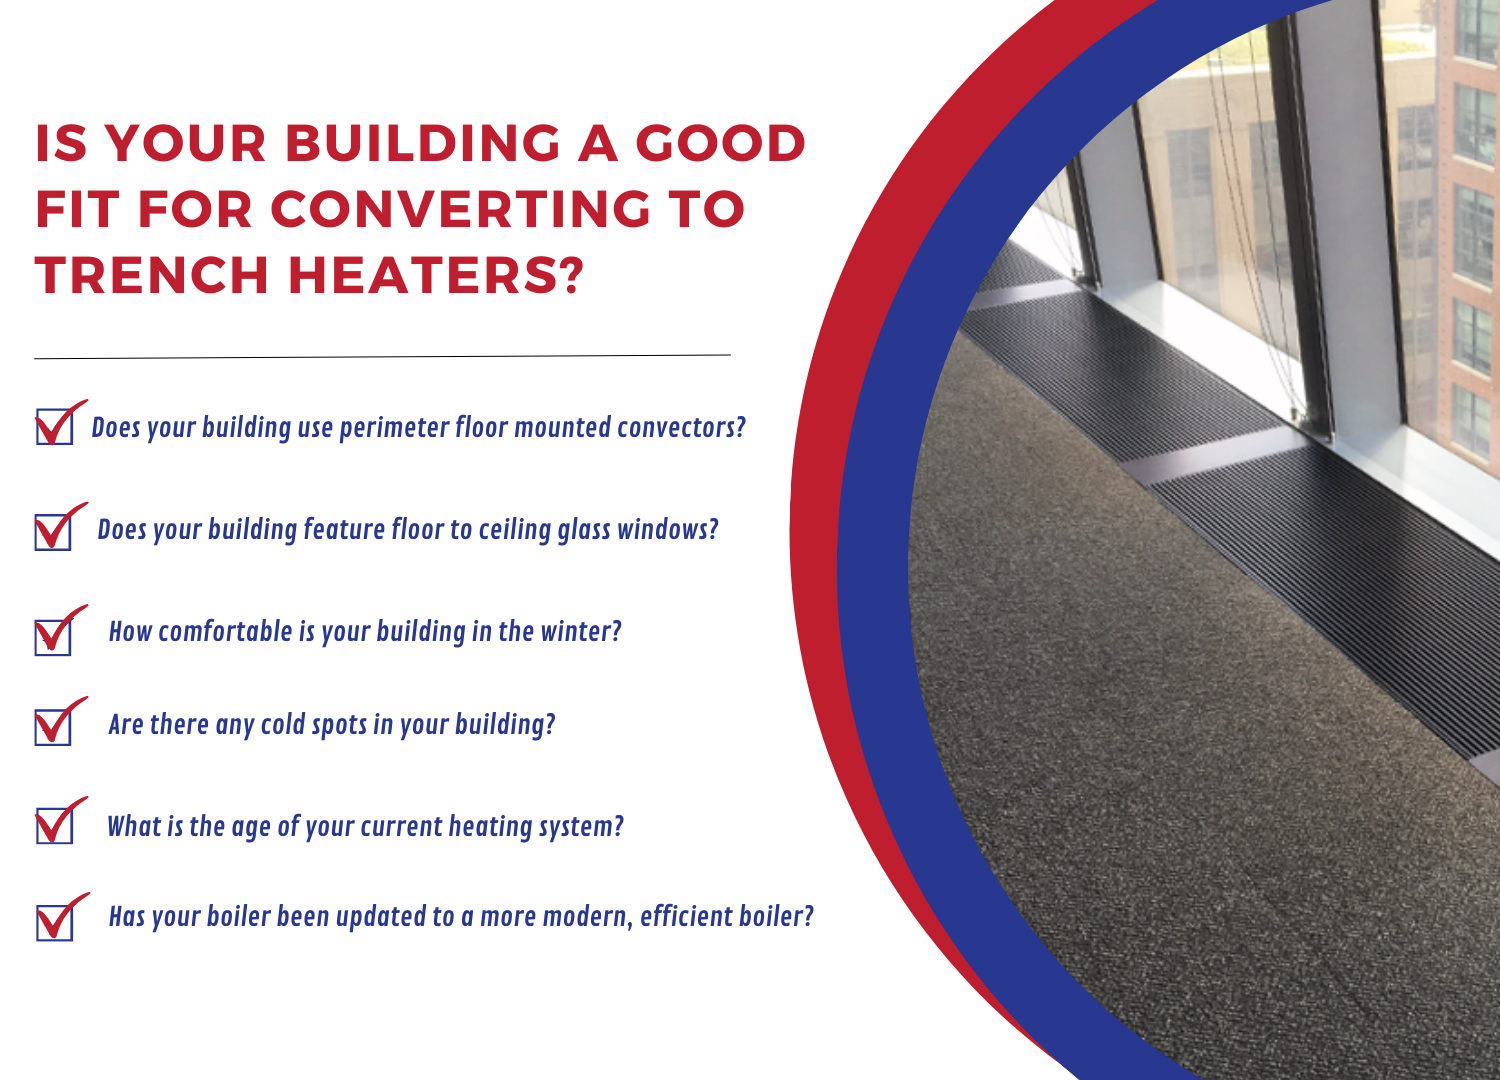 Is Your Building a Good Fit for Converting to Trench Heaters?